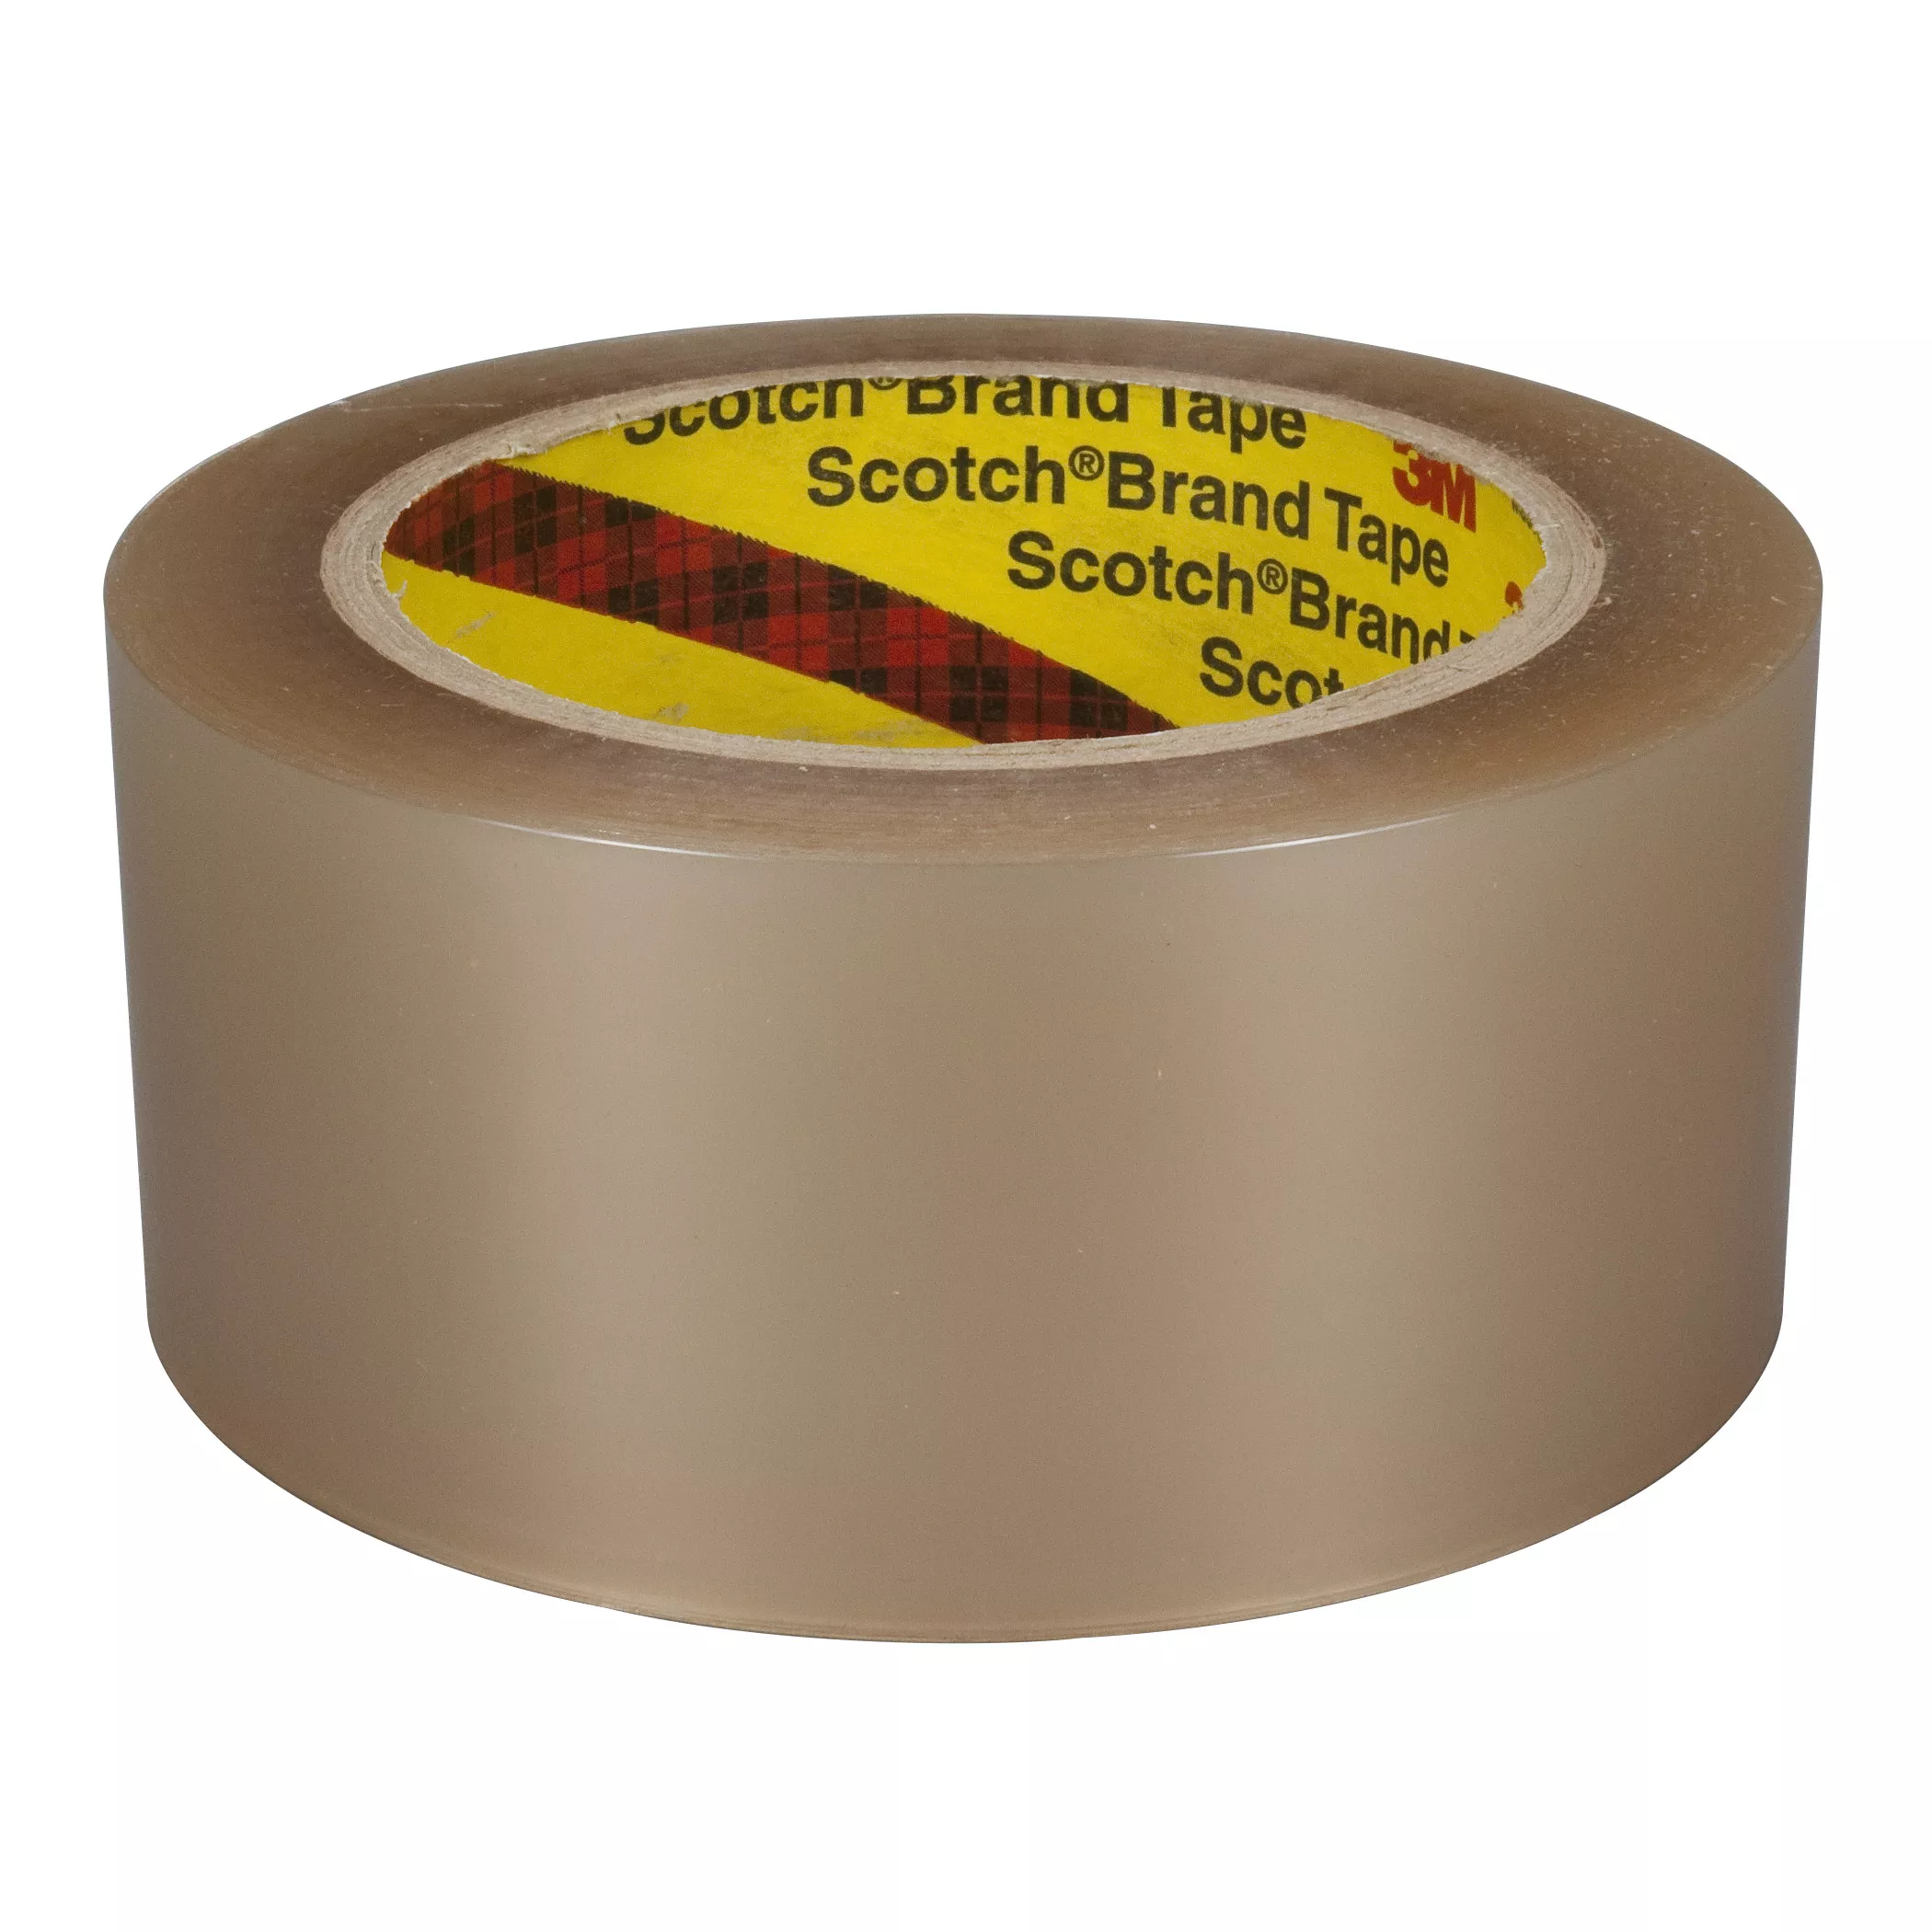 3M™ Polyester Tape 8911, Transparent, 1 in x 72 yd, 2.3 mil, 36
Roll/Case